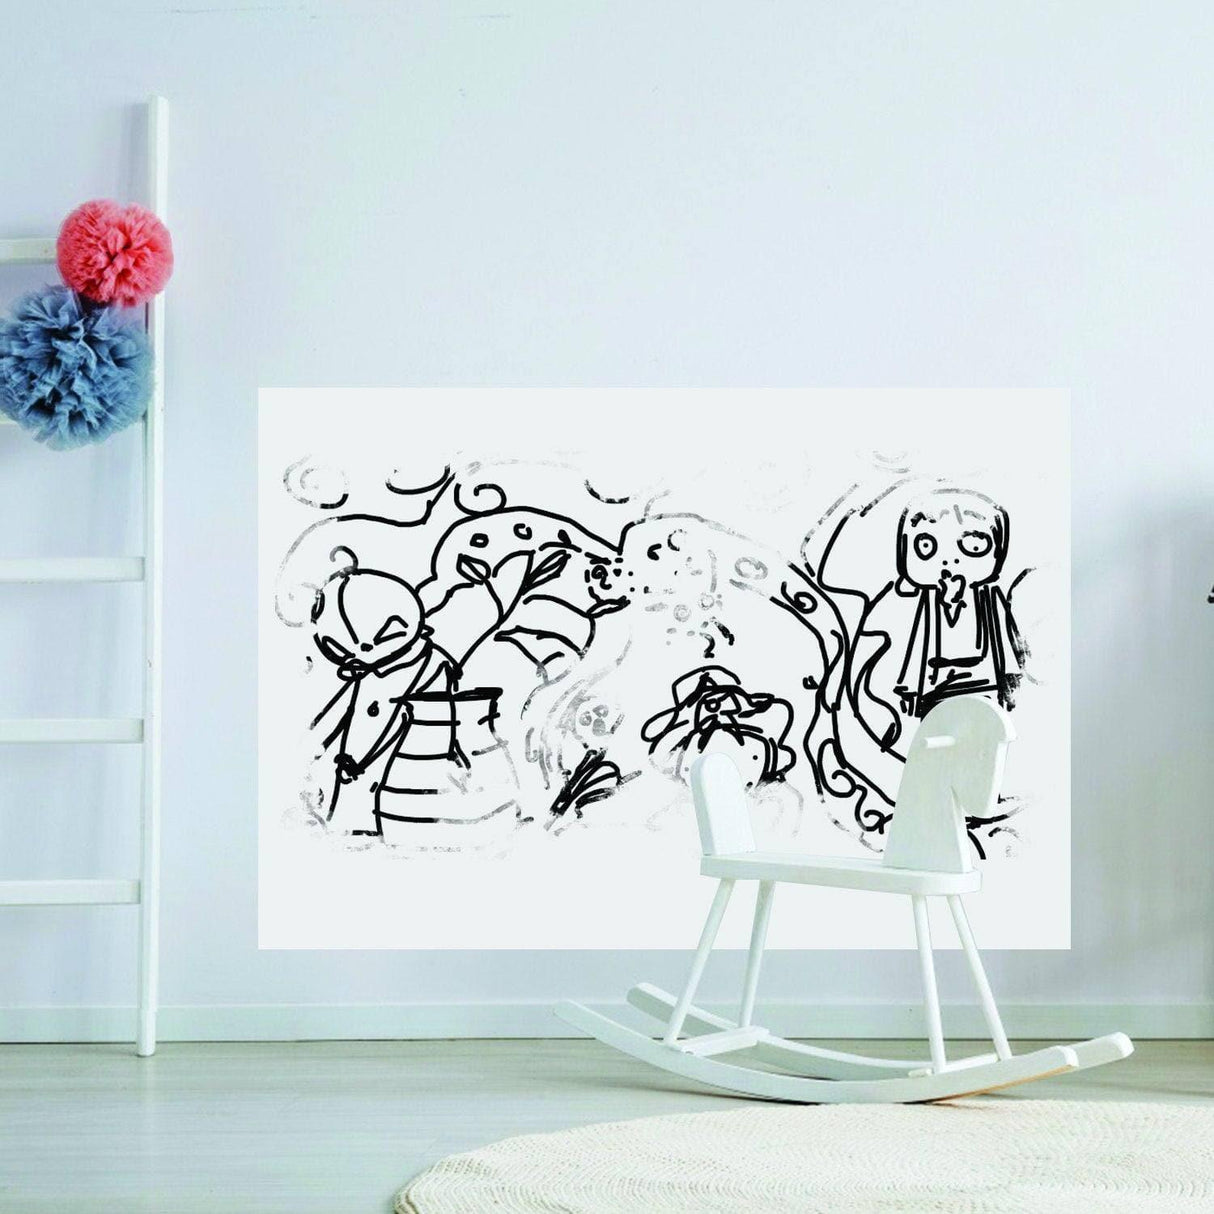 Whiteboard Sticker Wall Decal Poster Board for Classroom Home Desk 60cmx5m  white